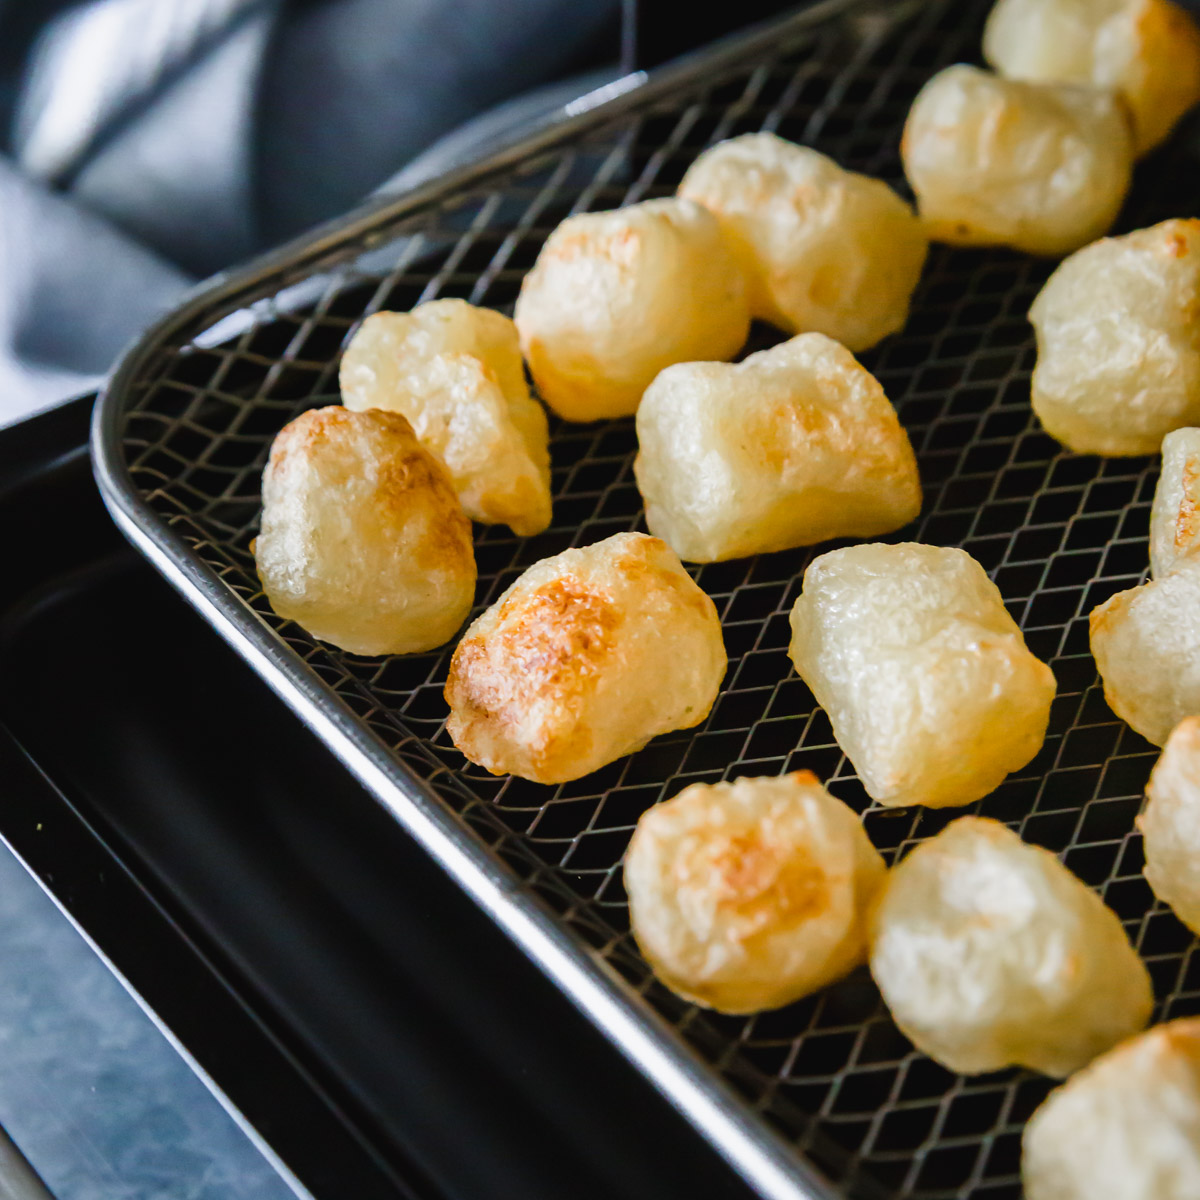 After 16-18 minutes in the fryer, the cauliflower gnocchi is golden brown around the edges and has the perfect crunch to enjoy just the way you want it.